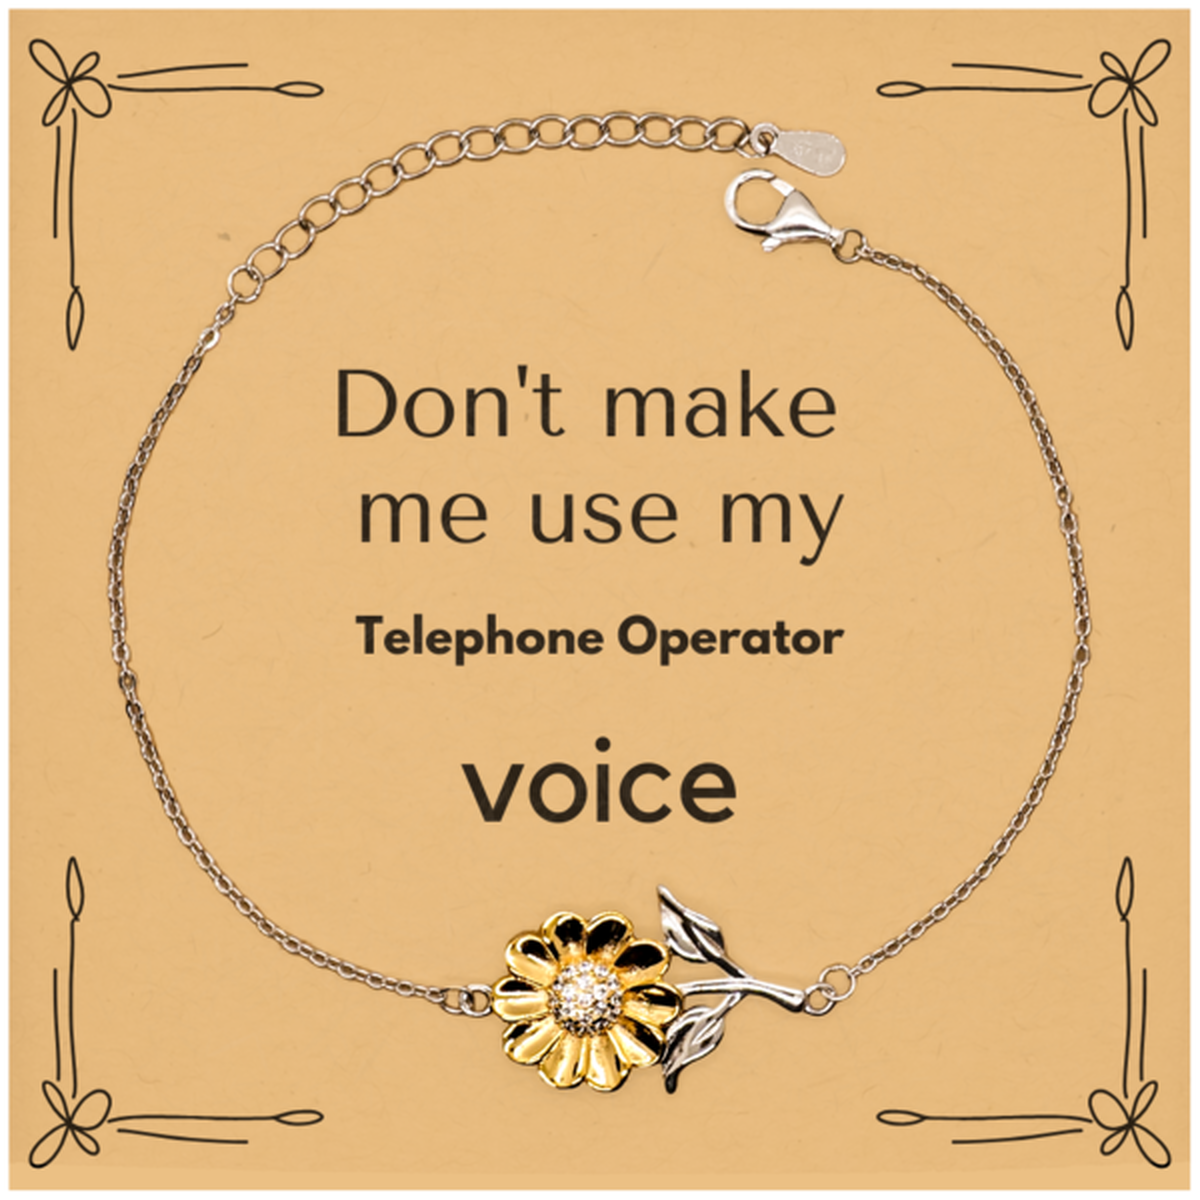 Don't make me use my Telephone Operator voice, Sarcasm Telephone Operator Card Gifts, Christmas Telephone Operator Sunflower Bracelet Birthday Unique Gifts For Telephone Operator Coworkers, Men, Women, Colleague, Friends